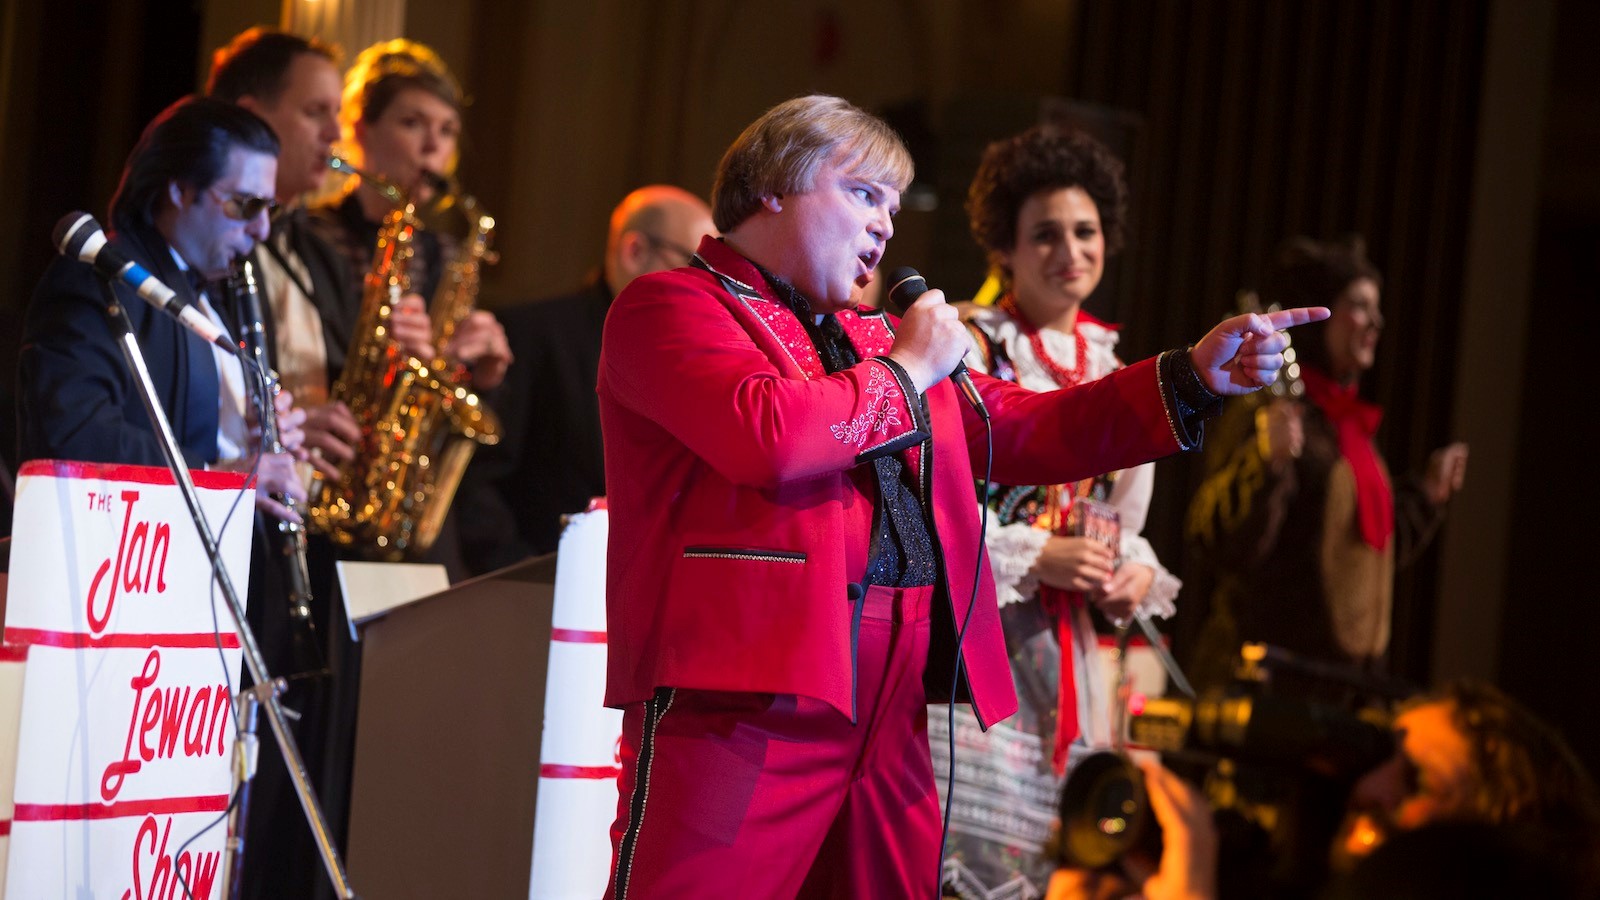 the polka king movie review